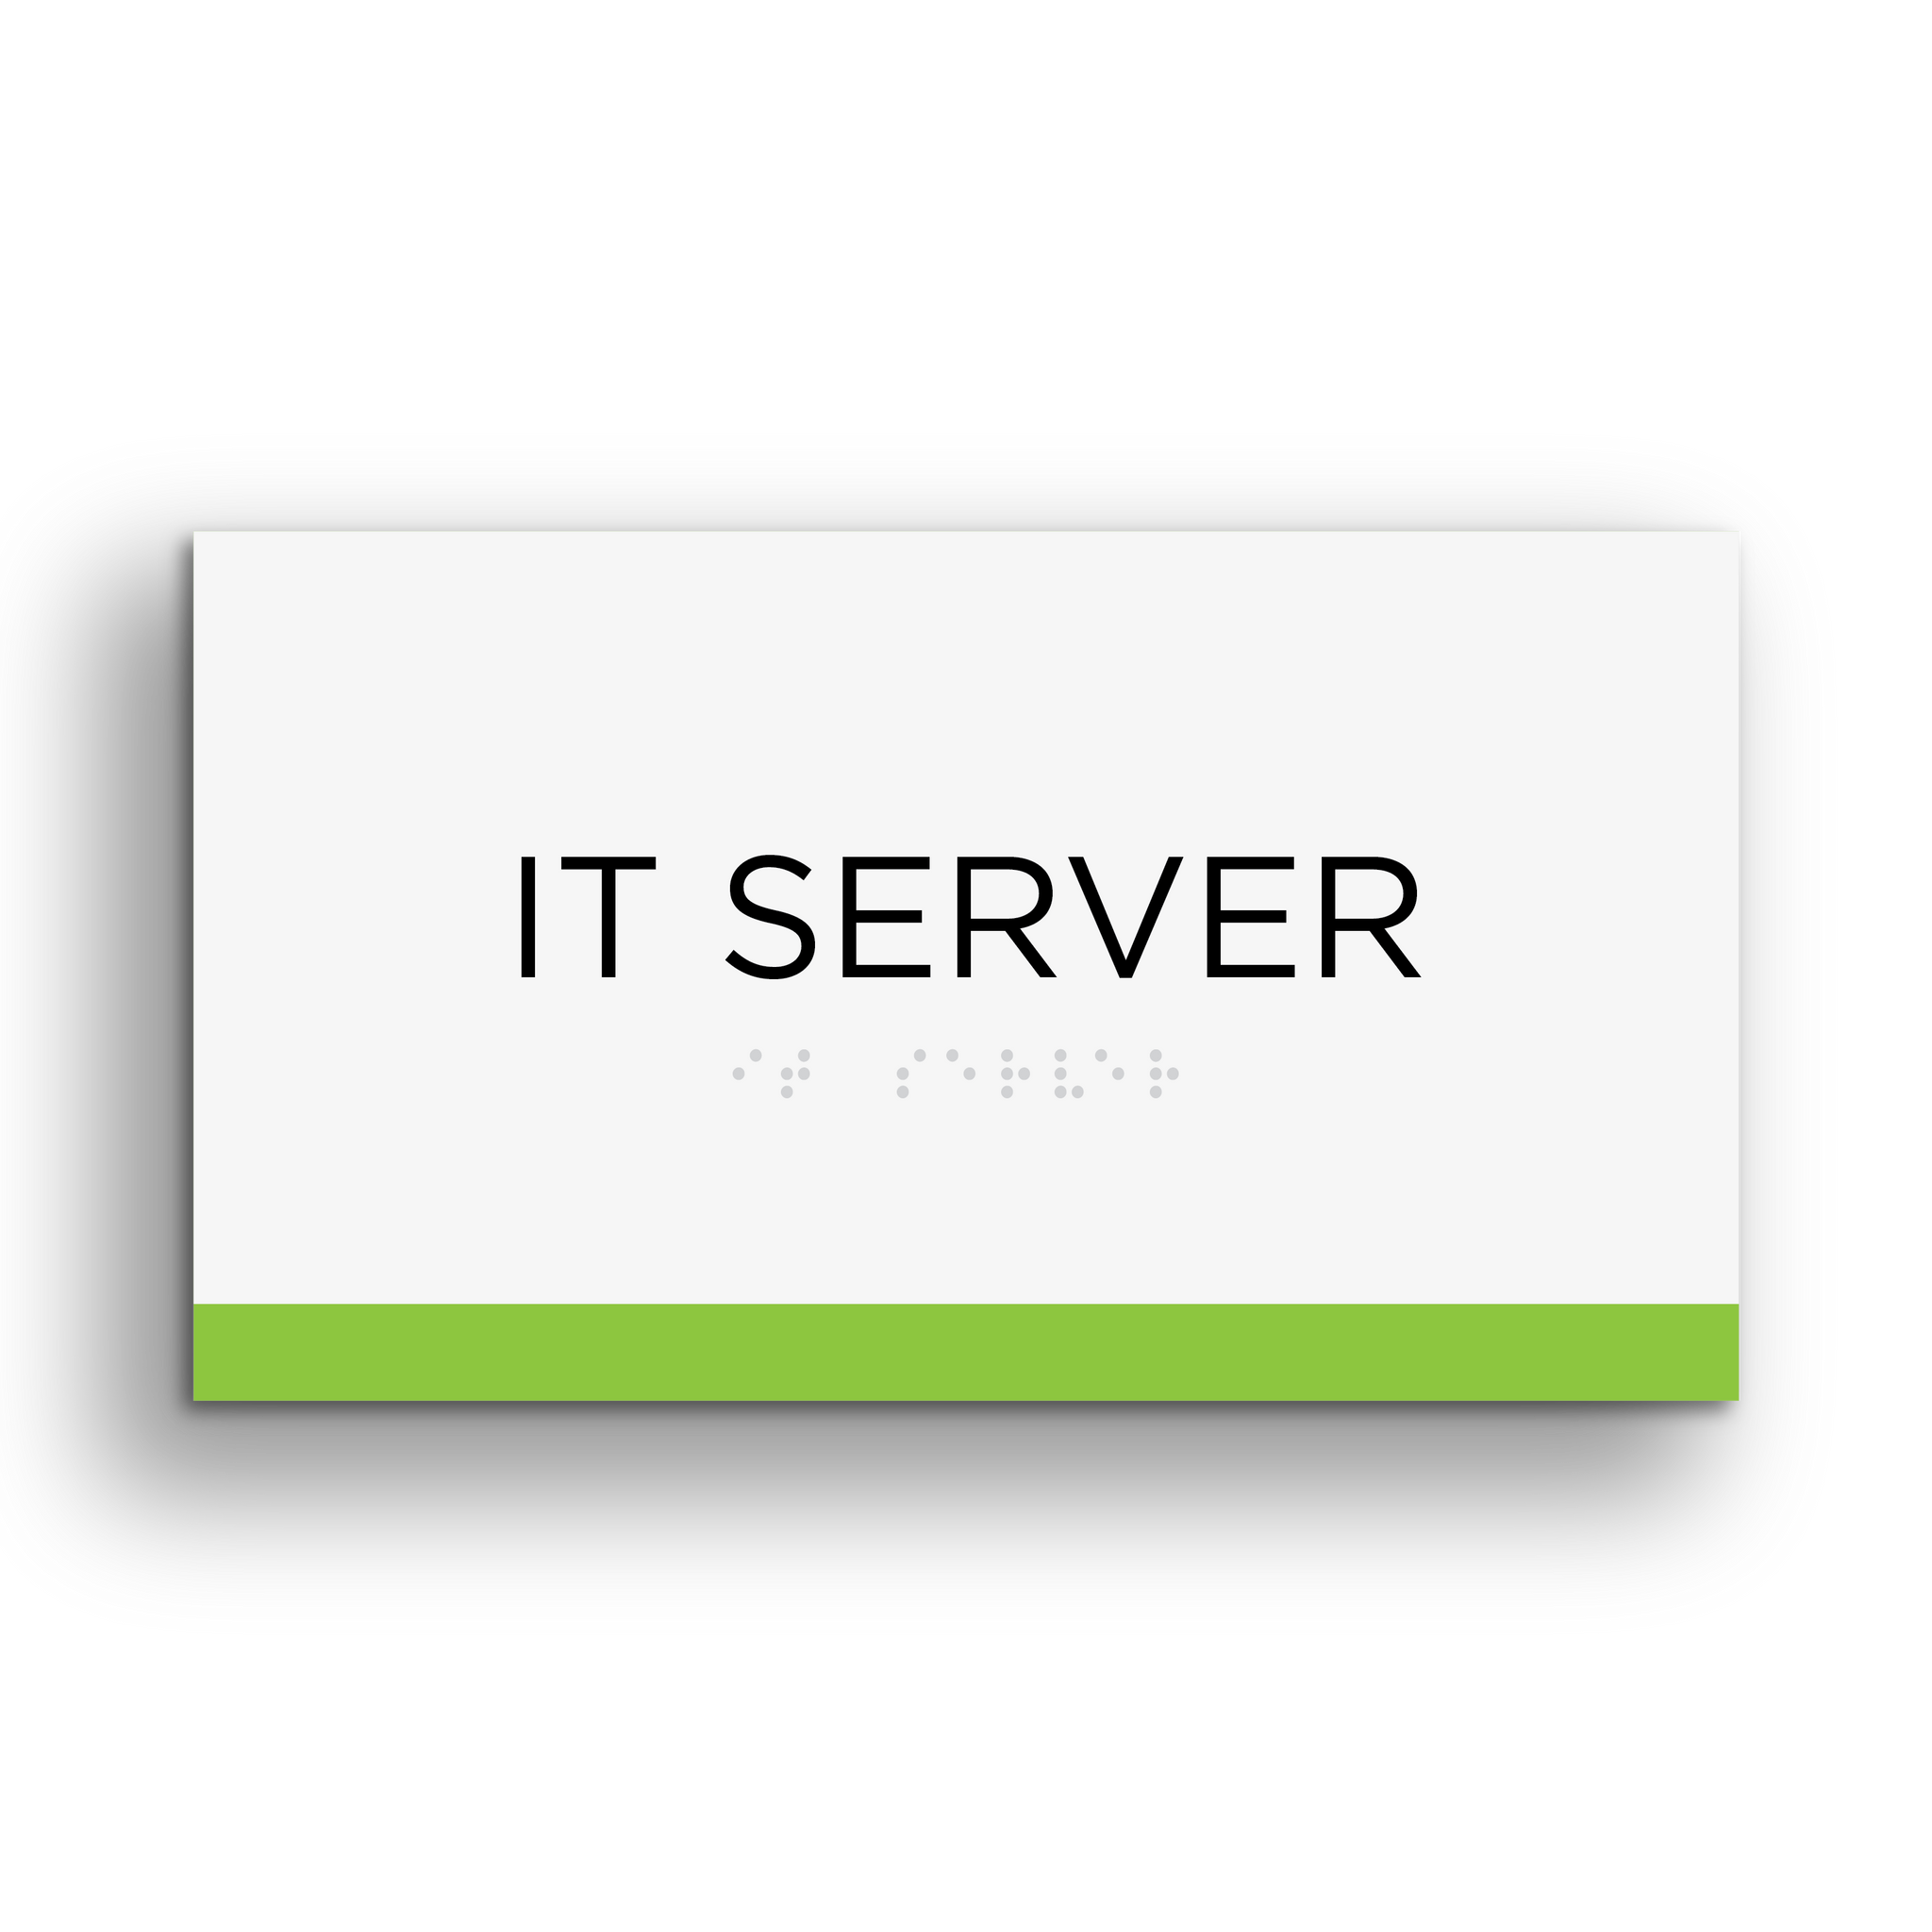 The Chin IT Server